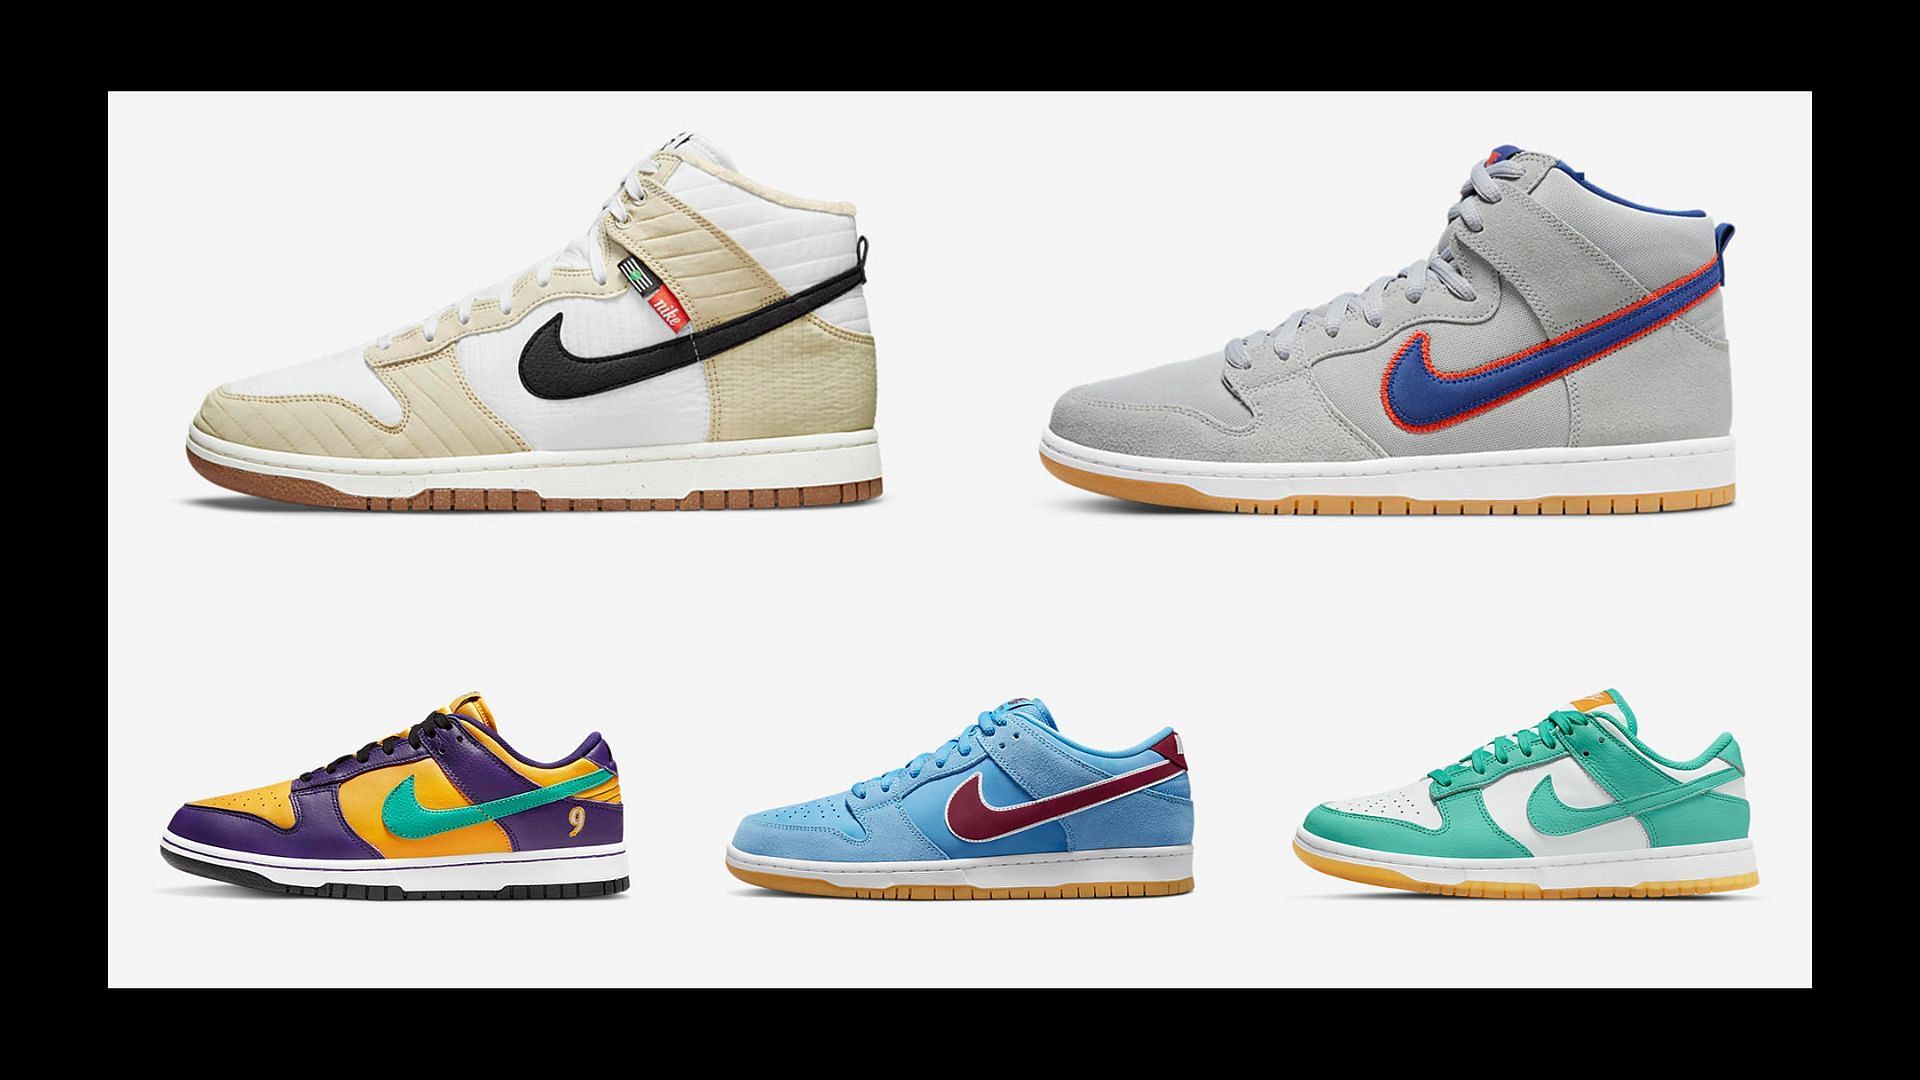 5 upcoming Nike upcoming dunks Dunk releases in July 2022